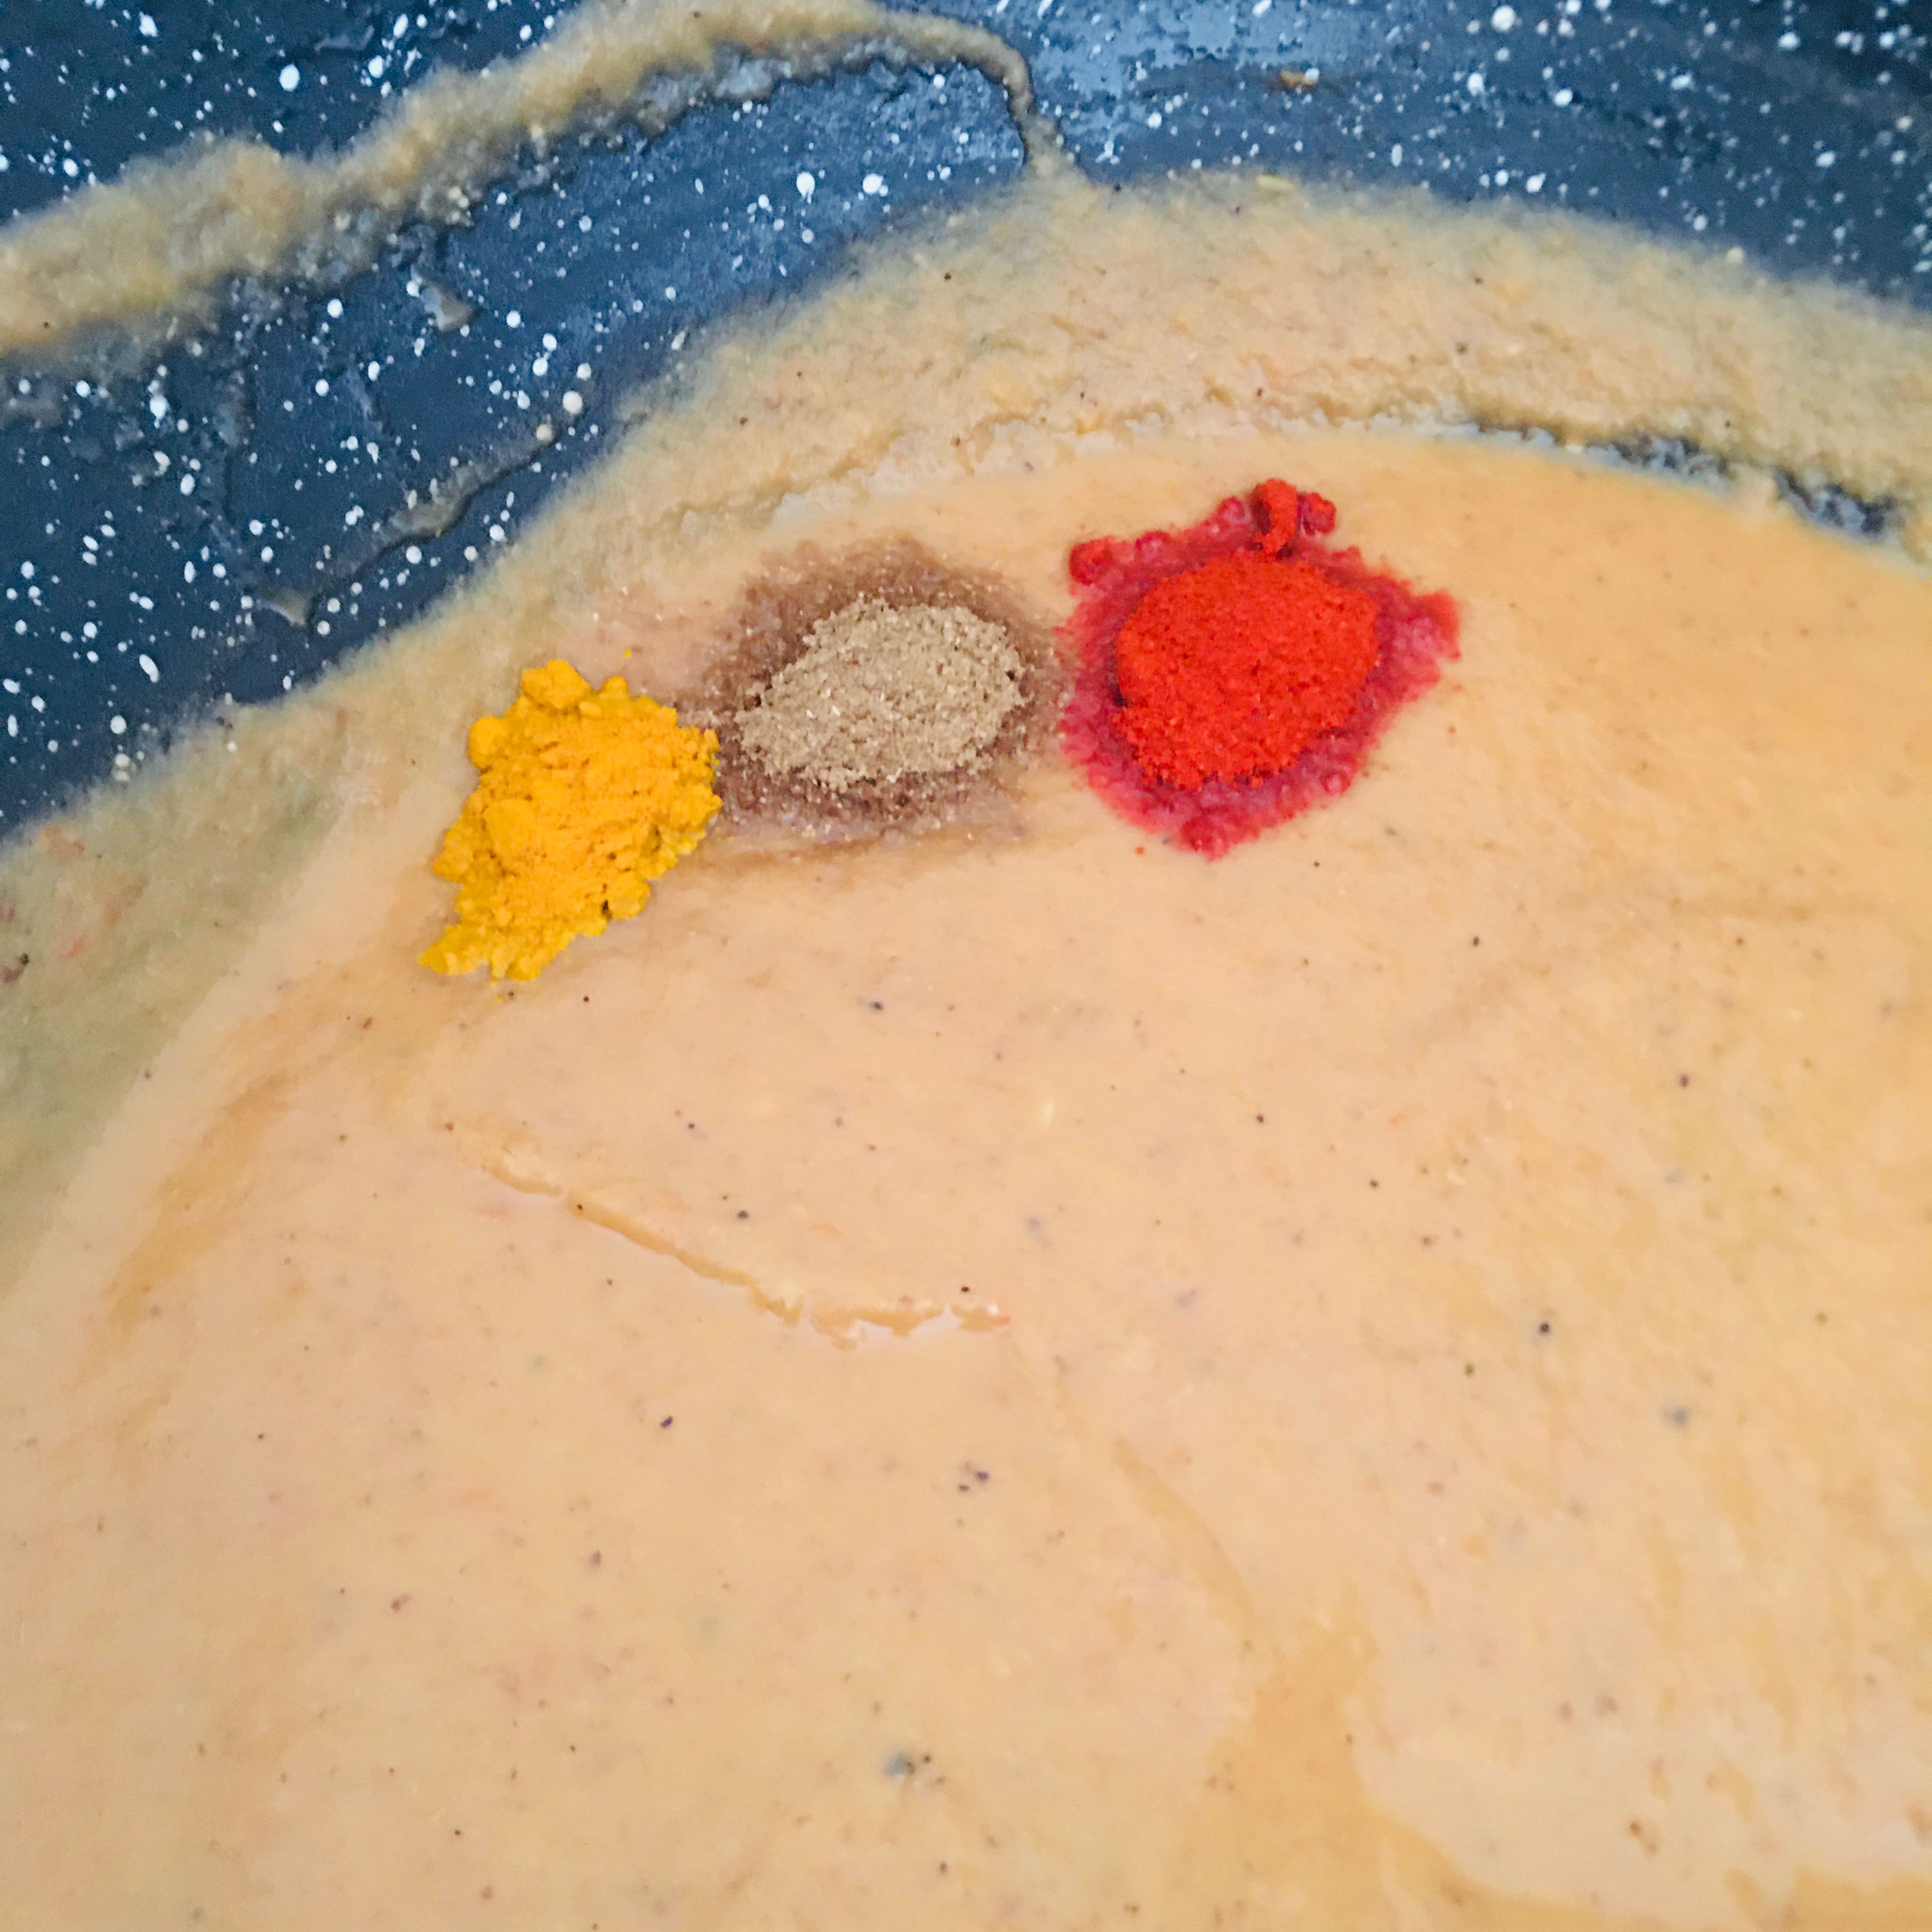 Meanwhile it’s time to spice up the blended onion tomato mixture. Add the listed spice powders to the gravy. Continue cooking the mixture for another 5 minutes.